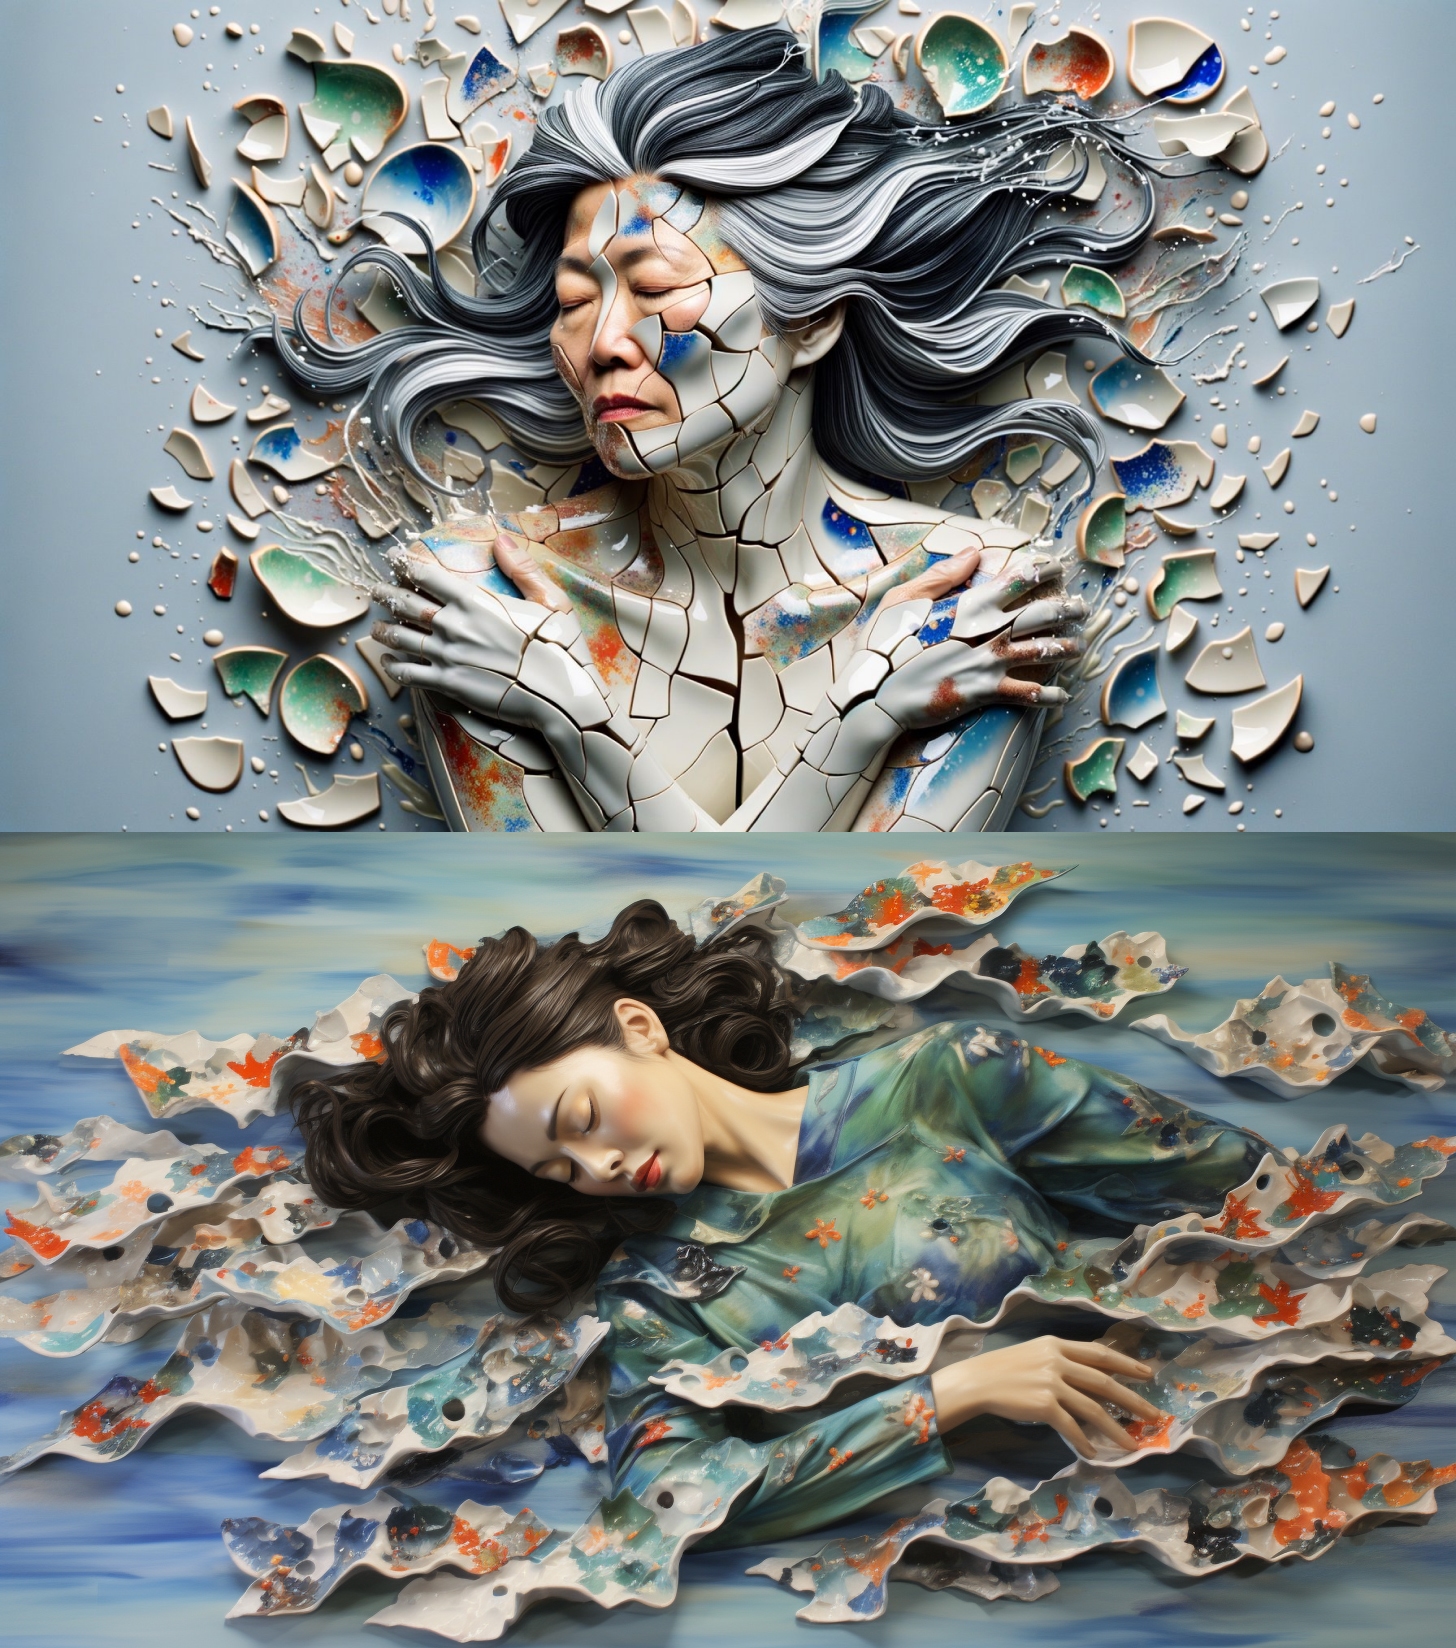 DALL-E 3 (top) vs Midjourney (bottom): A middle-aged woman of Asian descent, her dark hair streaked with silver, appears fractured and splintered, intricately embedded within a sea of broken porcelain. The porcelain glistens with splatter paint patterns in a harmonious blend of glossy and matte blues, greens, oranges, and reds, capturing her dance in a surreal juxtaposition of movement and stillness. Her skin tone, a light hue like the porcelain, adds an almost mystical quality to her form.